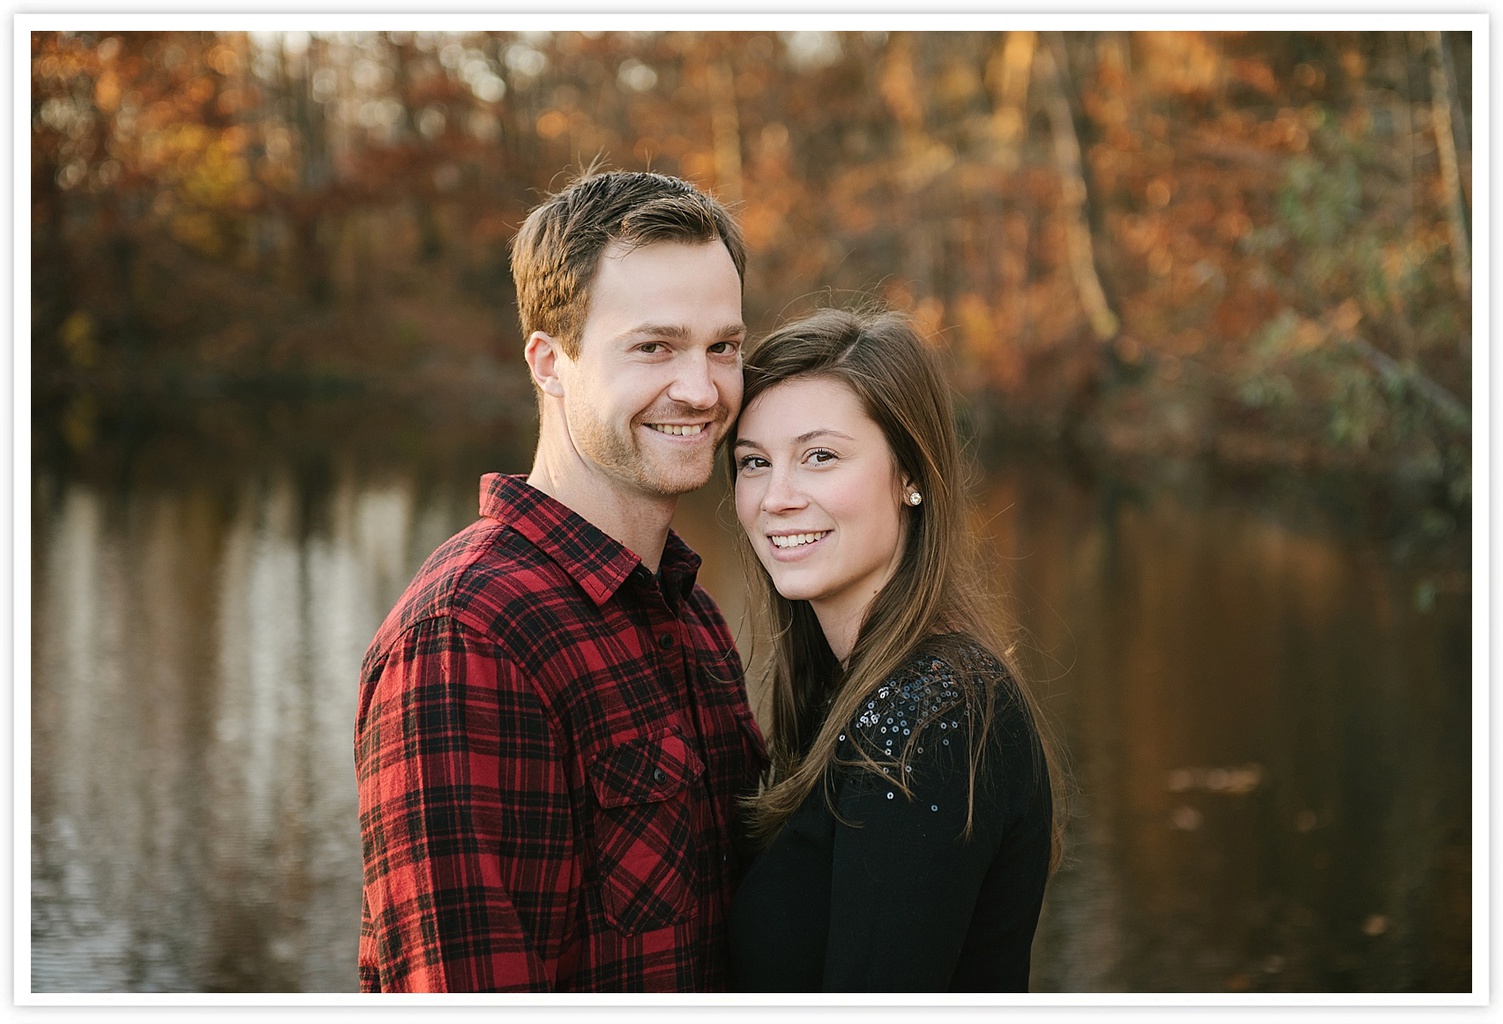 Lincoln Brick Park engagement photos in Grand Ledge, Michigan by Allie and Co. Photographers